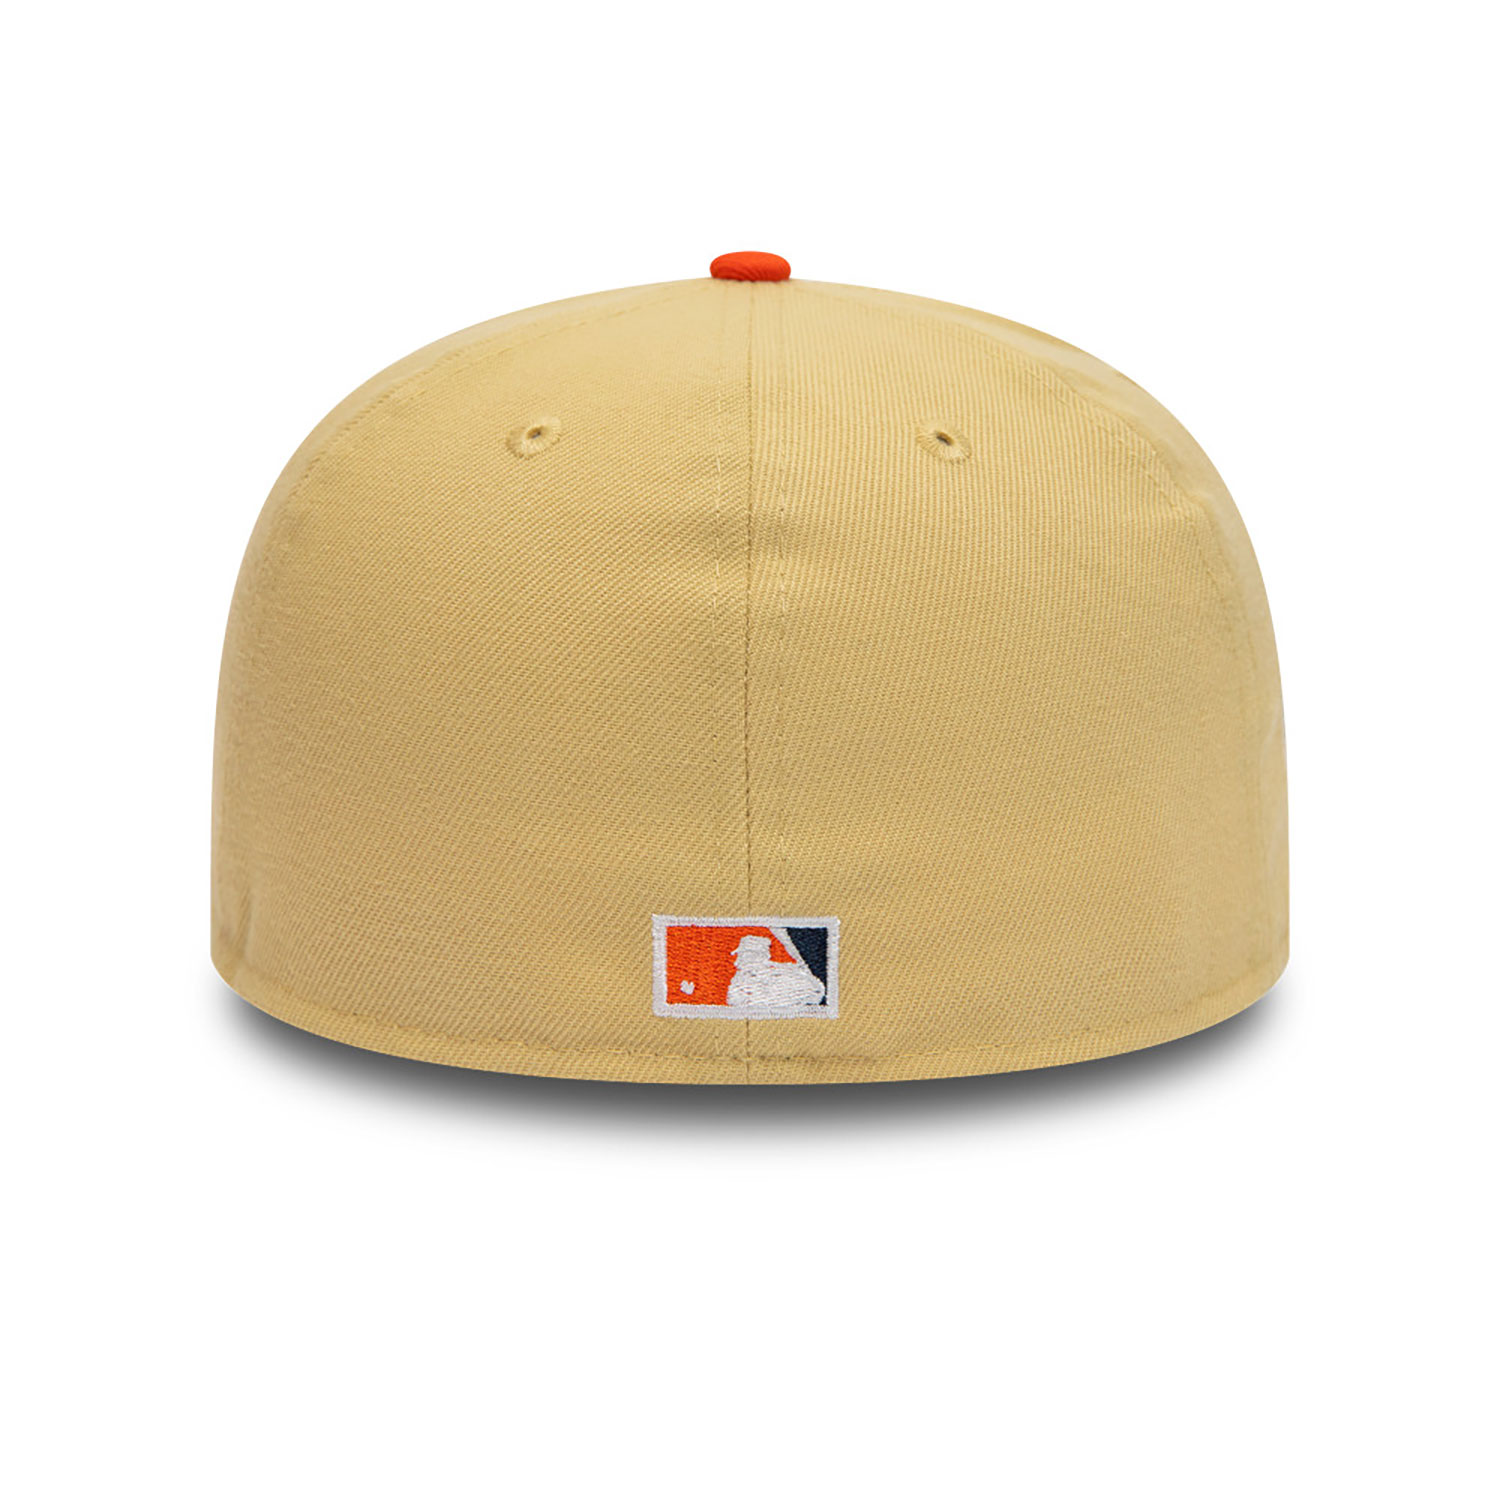 Detroit Tigers All Star Game Vegas Gold 59FIFTY Fitted Cap